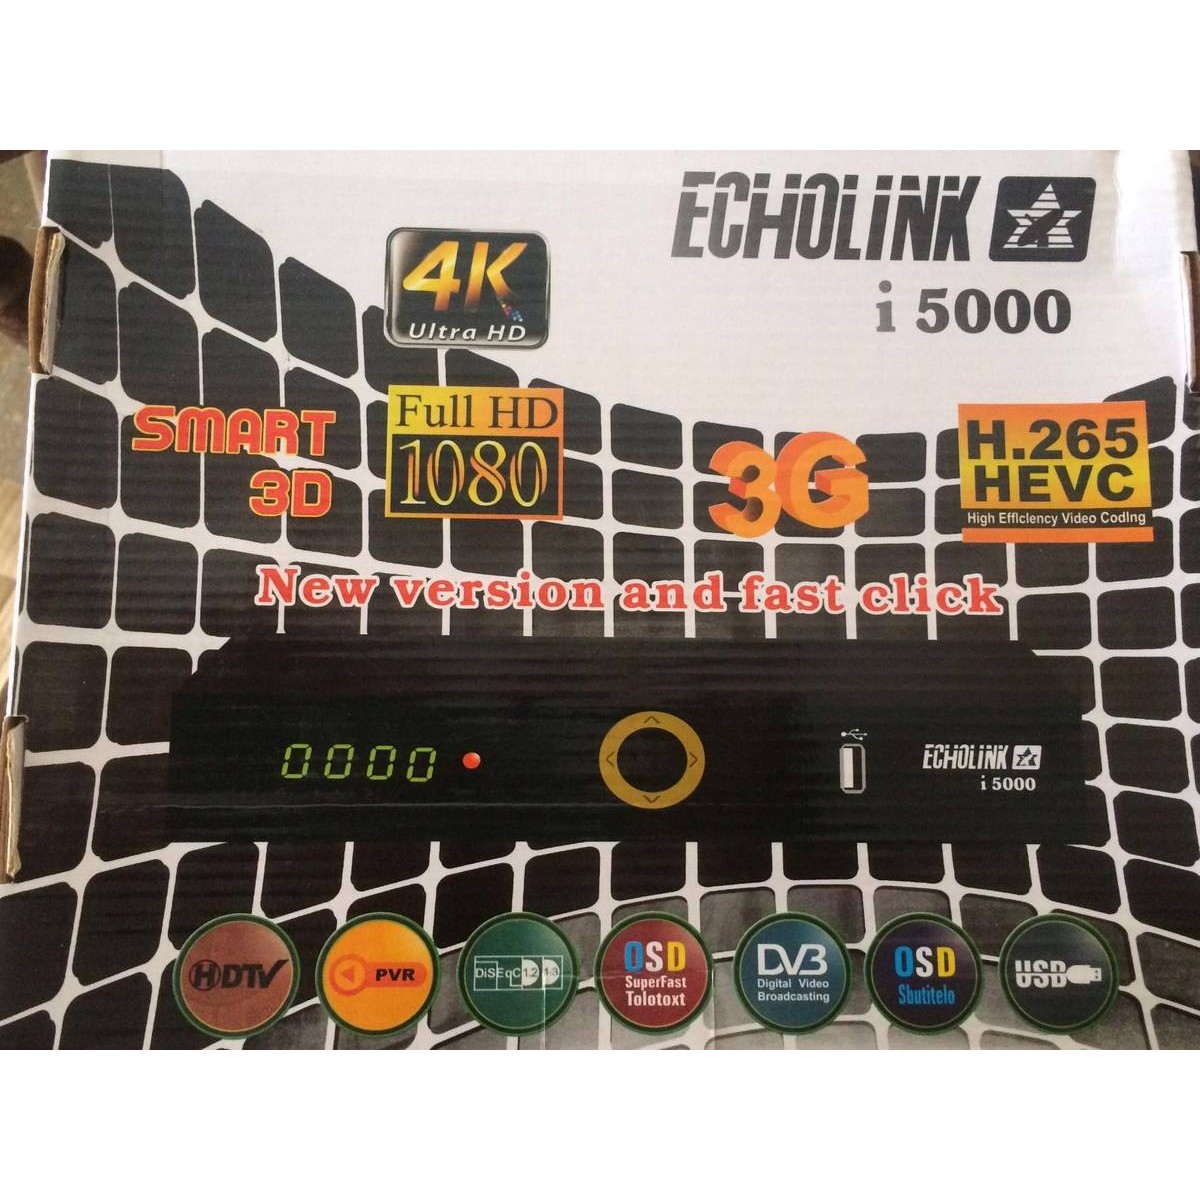 echolink receiver for olx lahore